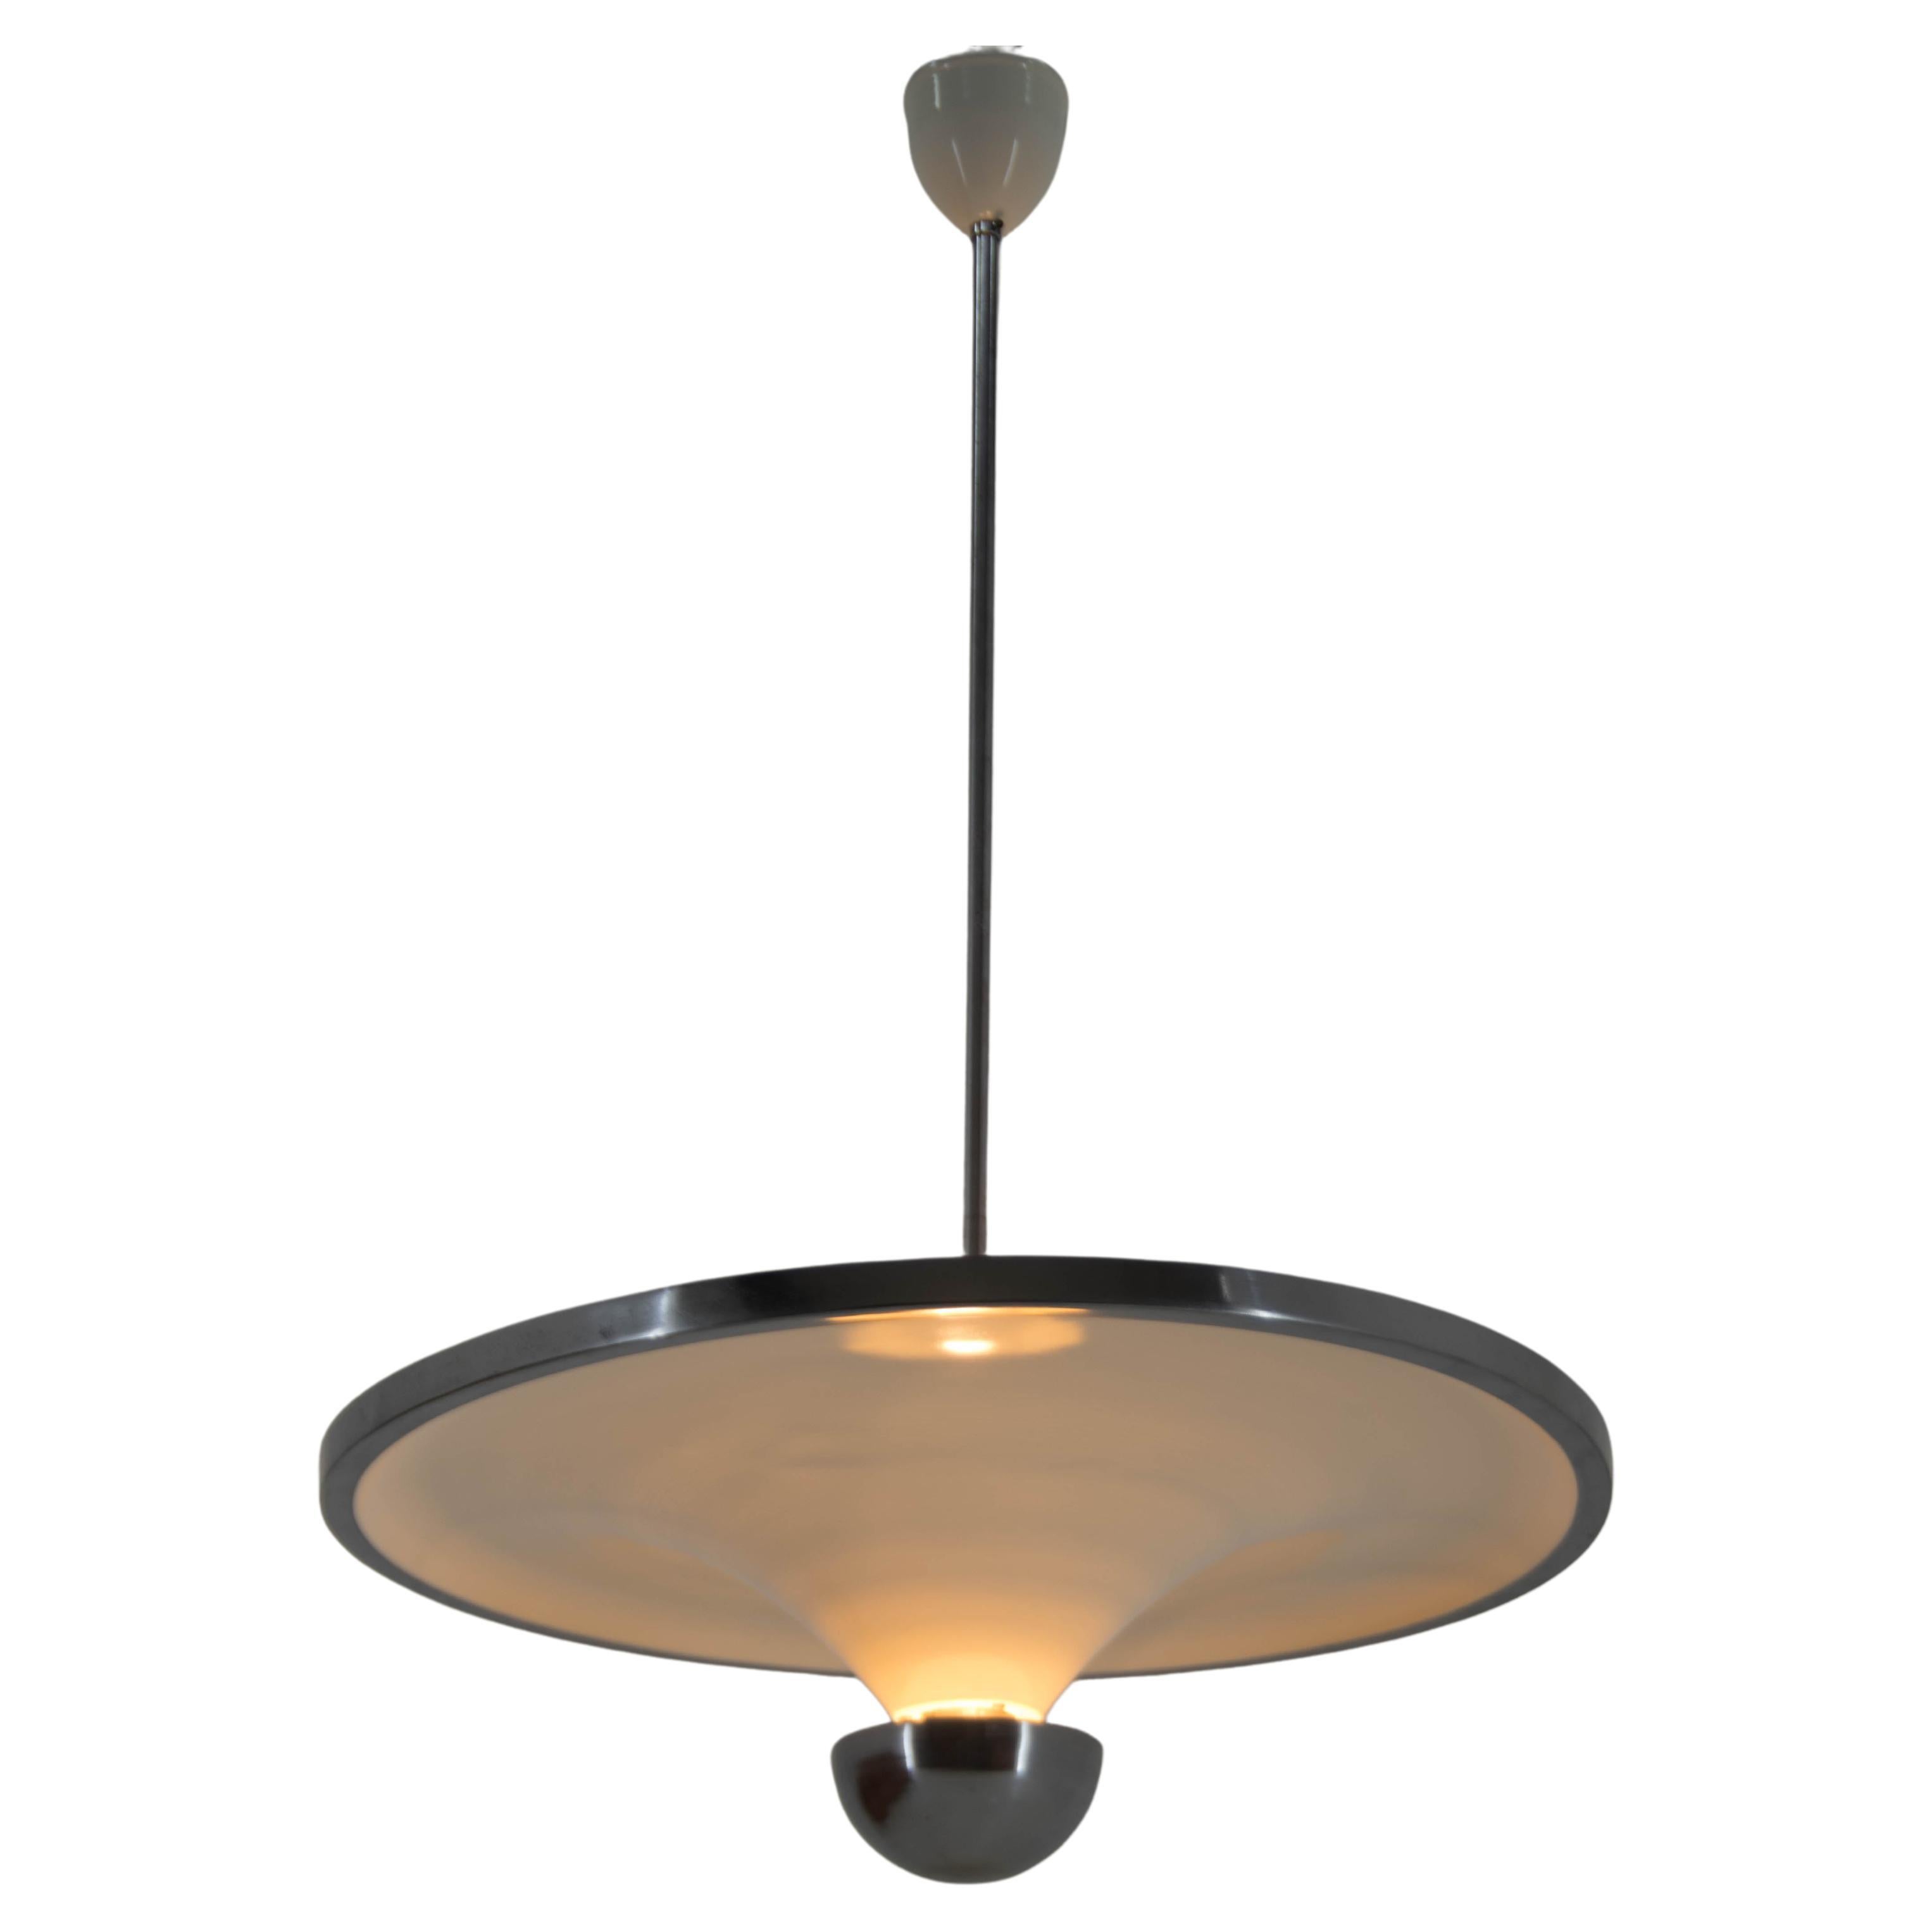 Rare Bauhaus Chandelier with Indirect Light by IAS, 1920s